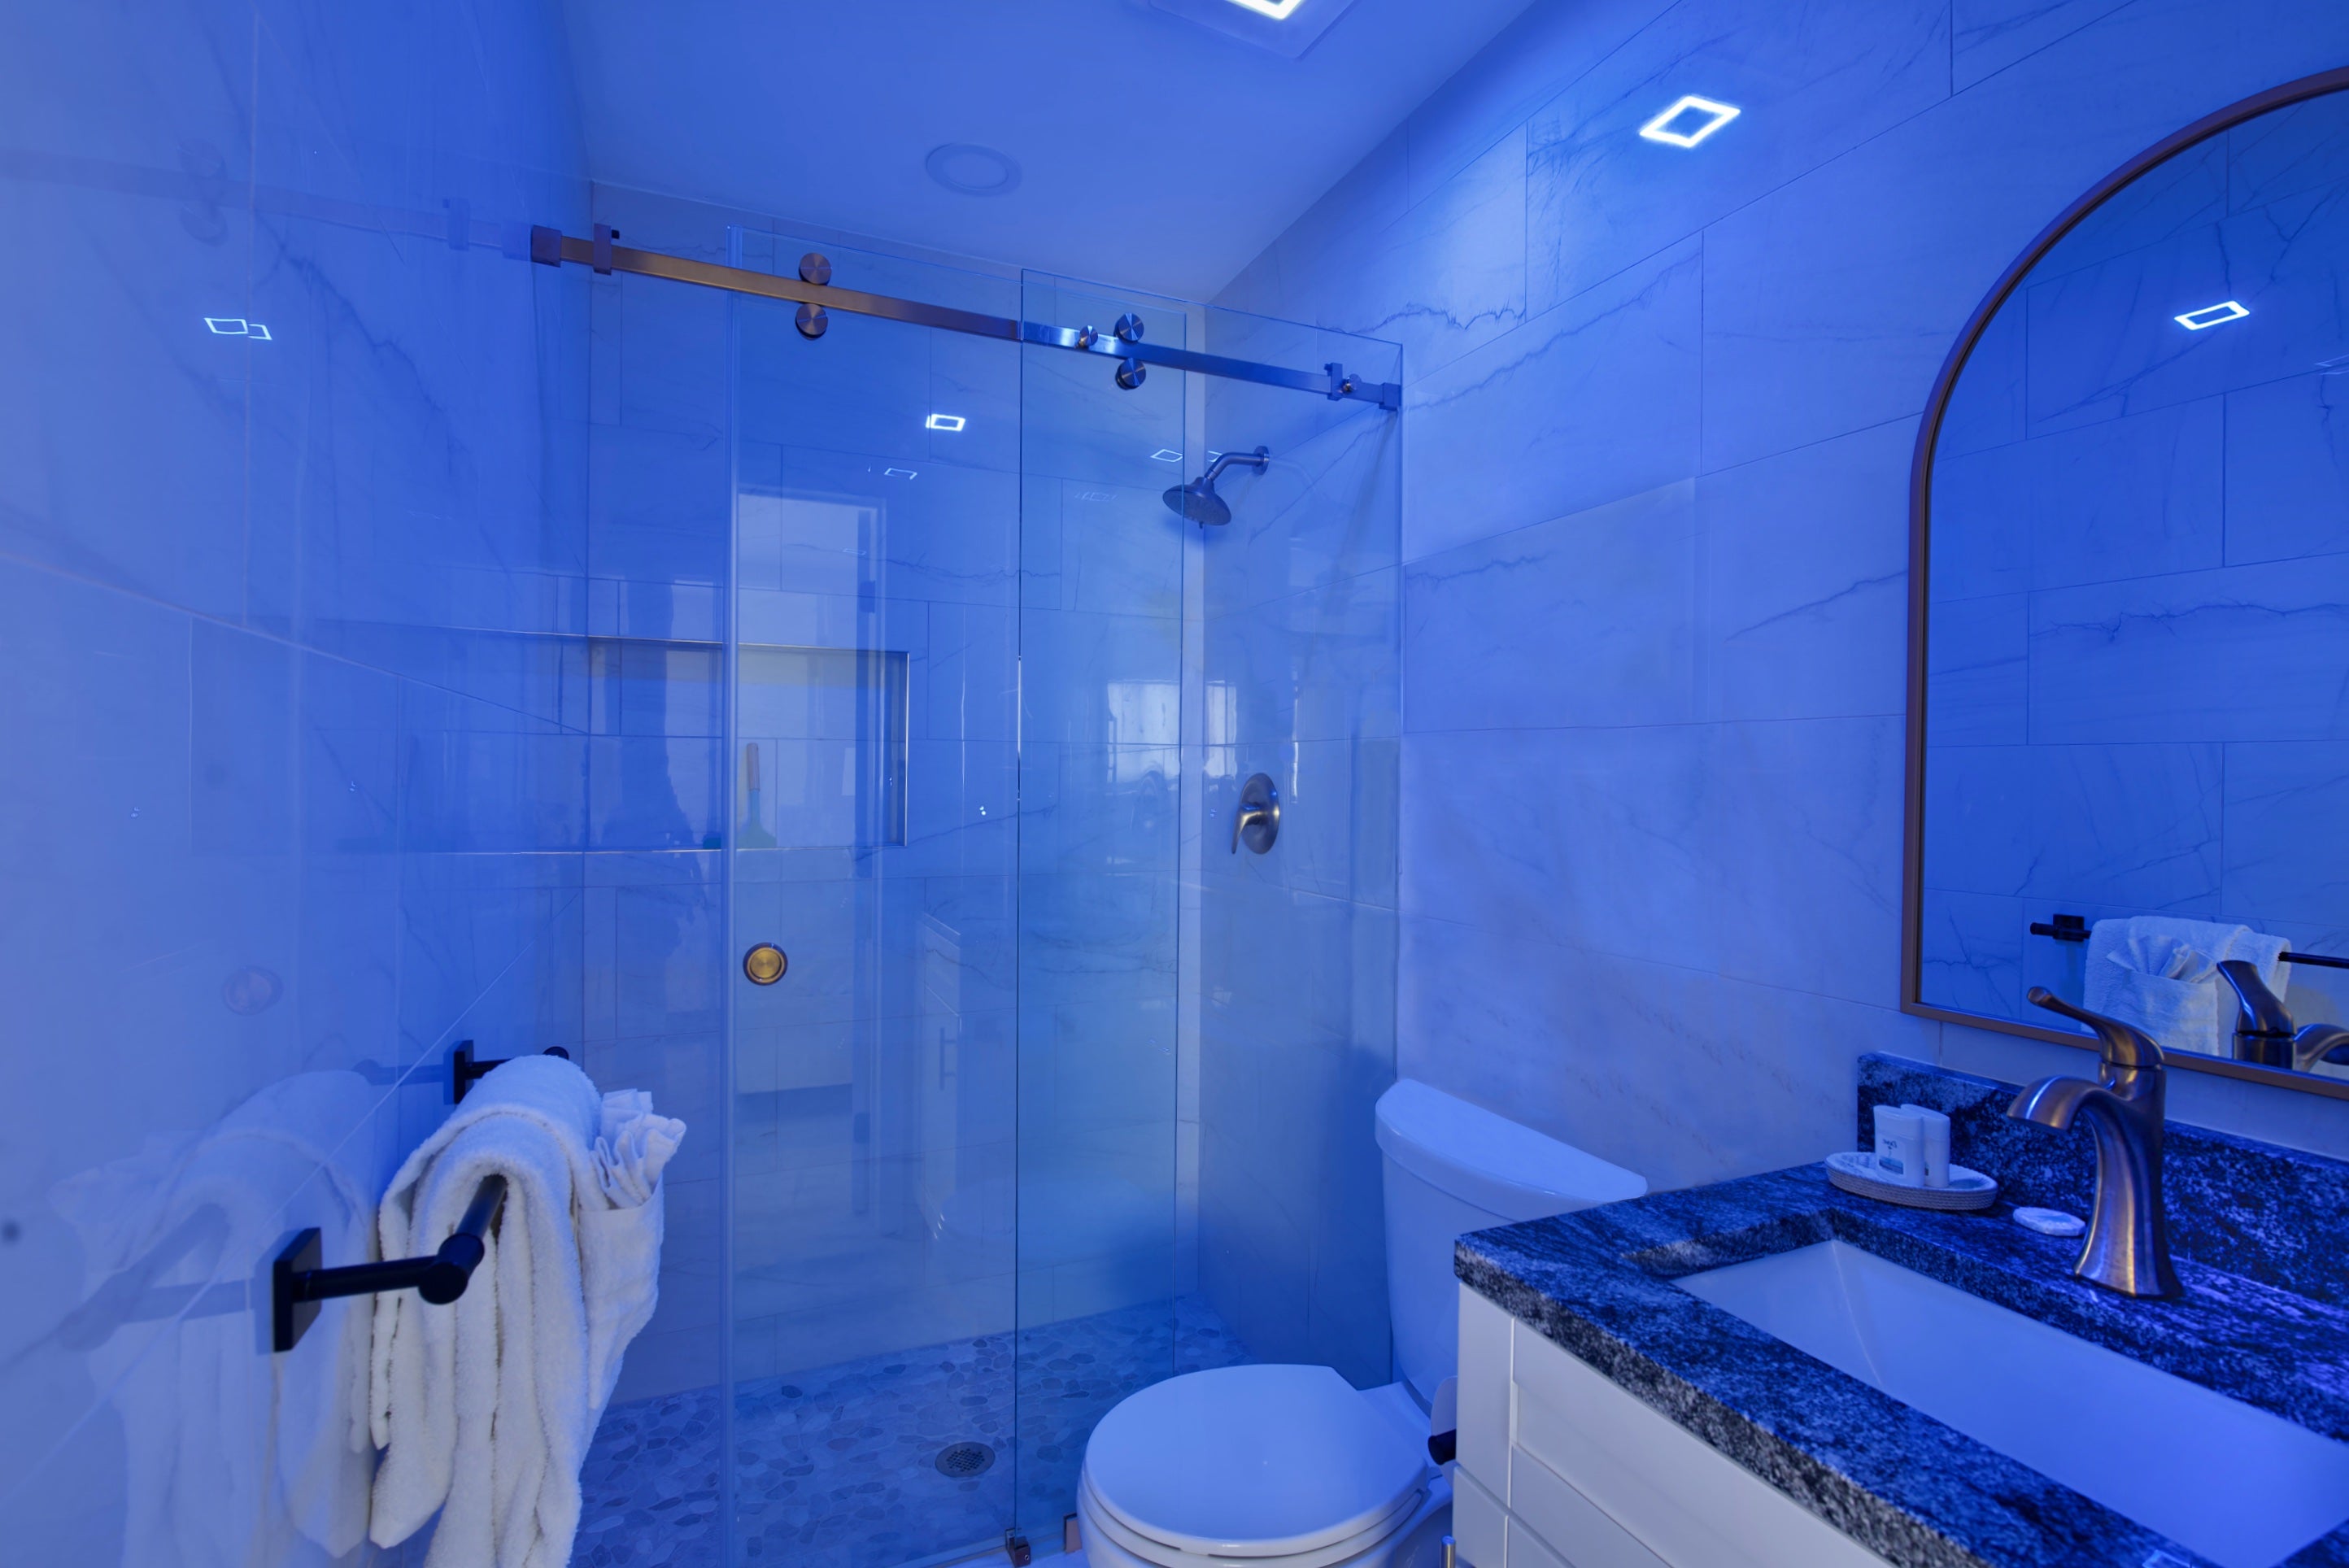 Primary Bathroom Side A with Blue Light